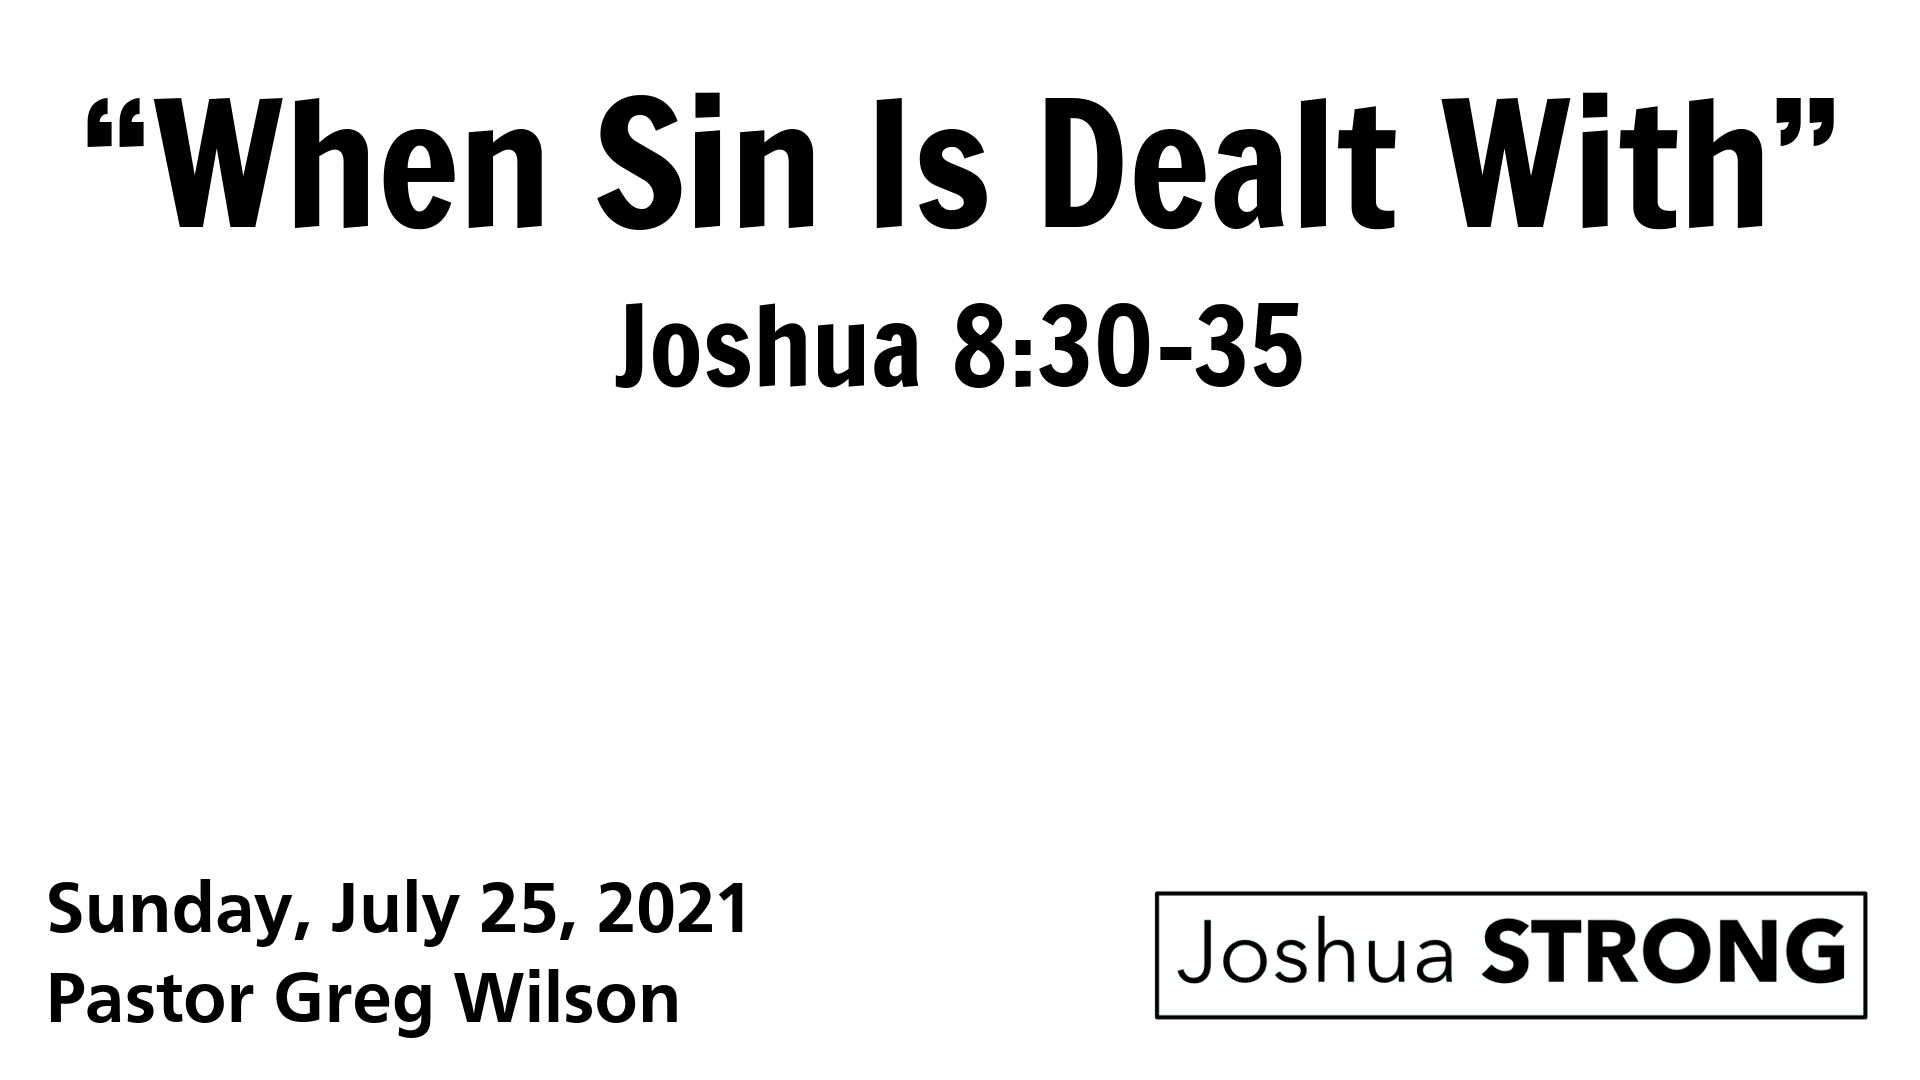 “When Sin is Dealt With”